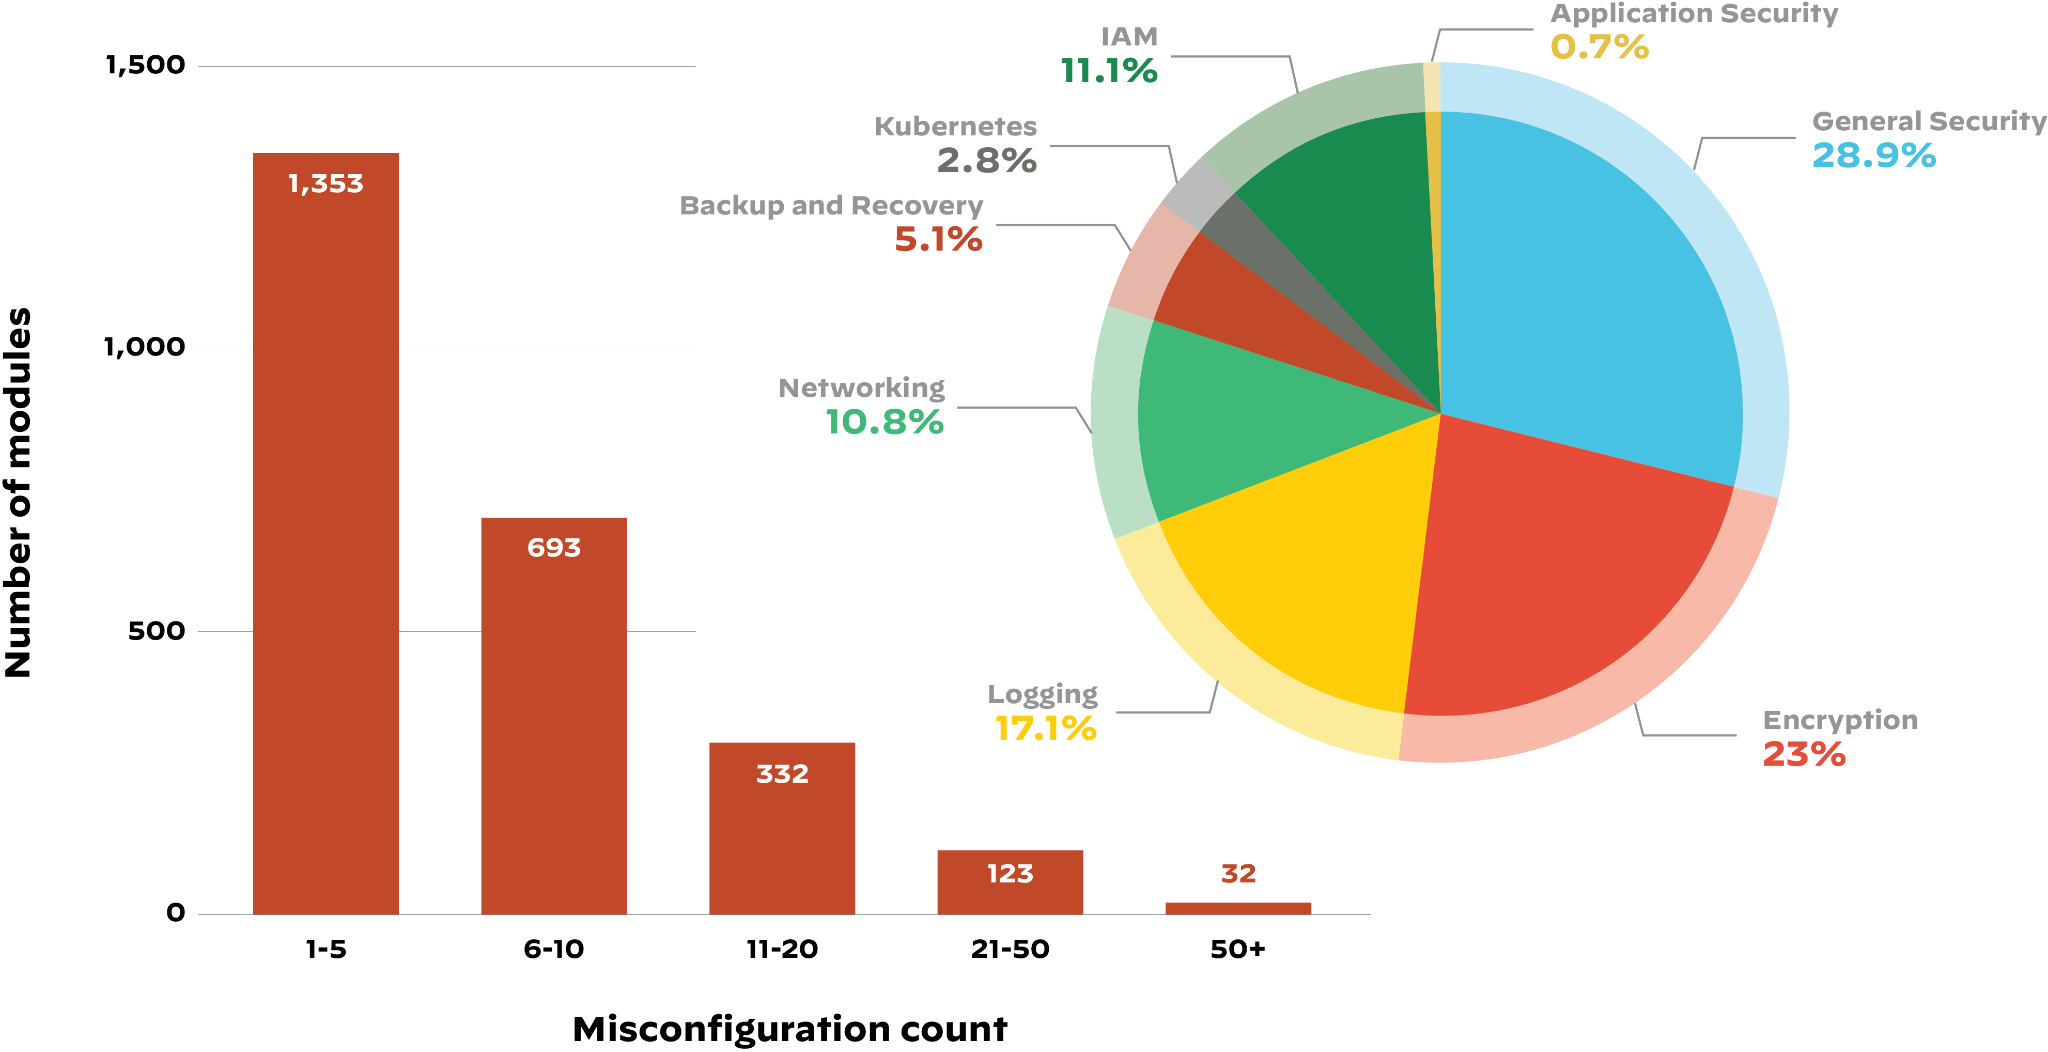 The Unit 42 Cloud Threat Report, 2H 2021, includes data from an analysis of public Terraform modules. The graph on the left shows the modules arranged by the number of misconfigurations they contain. The graph on the right shows the types of misconfigurations and their percentages. 